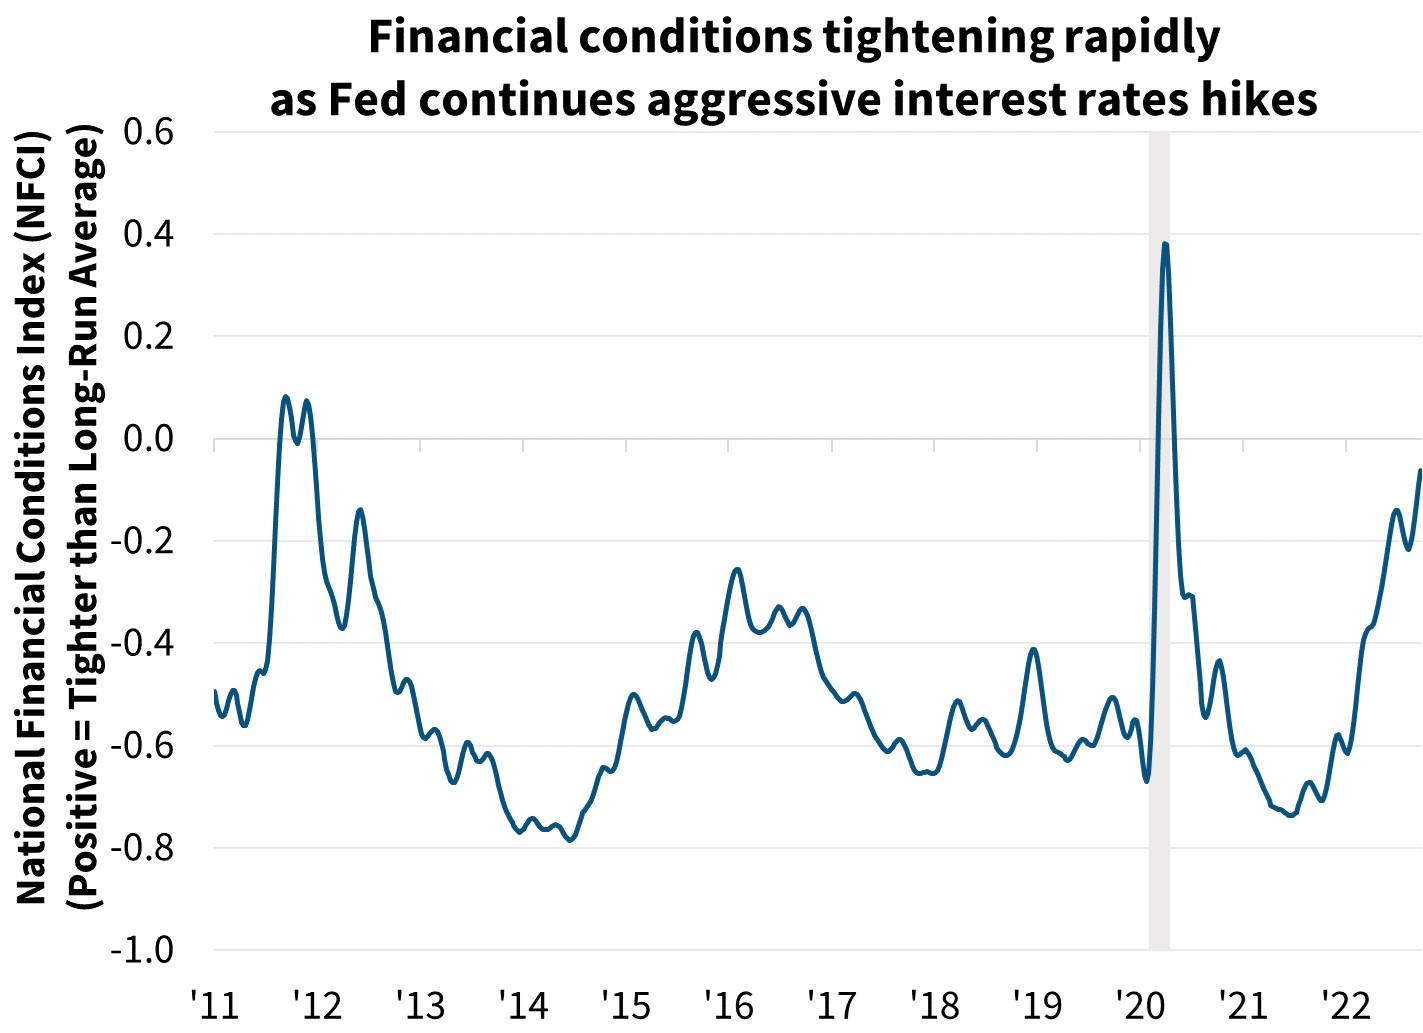  Financial conditions tightening rapidly as Fed continues aggressive interest rates hikes 